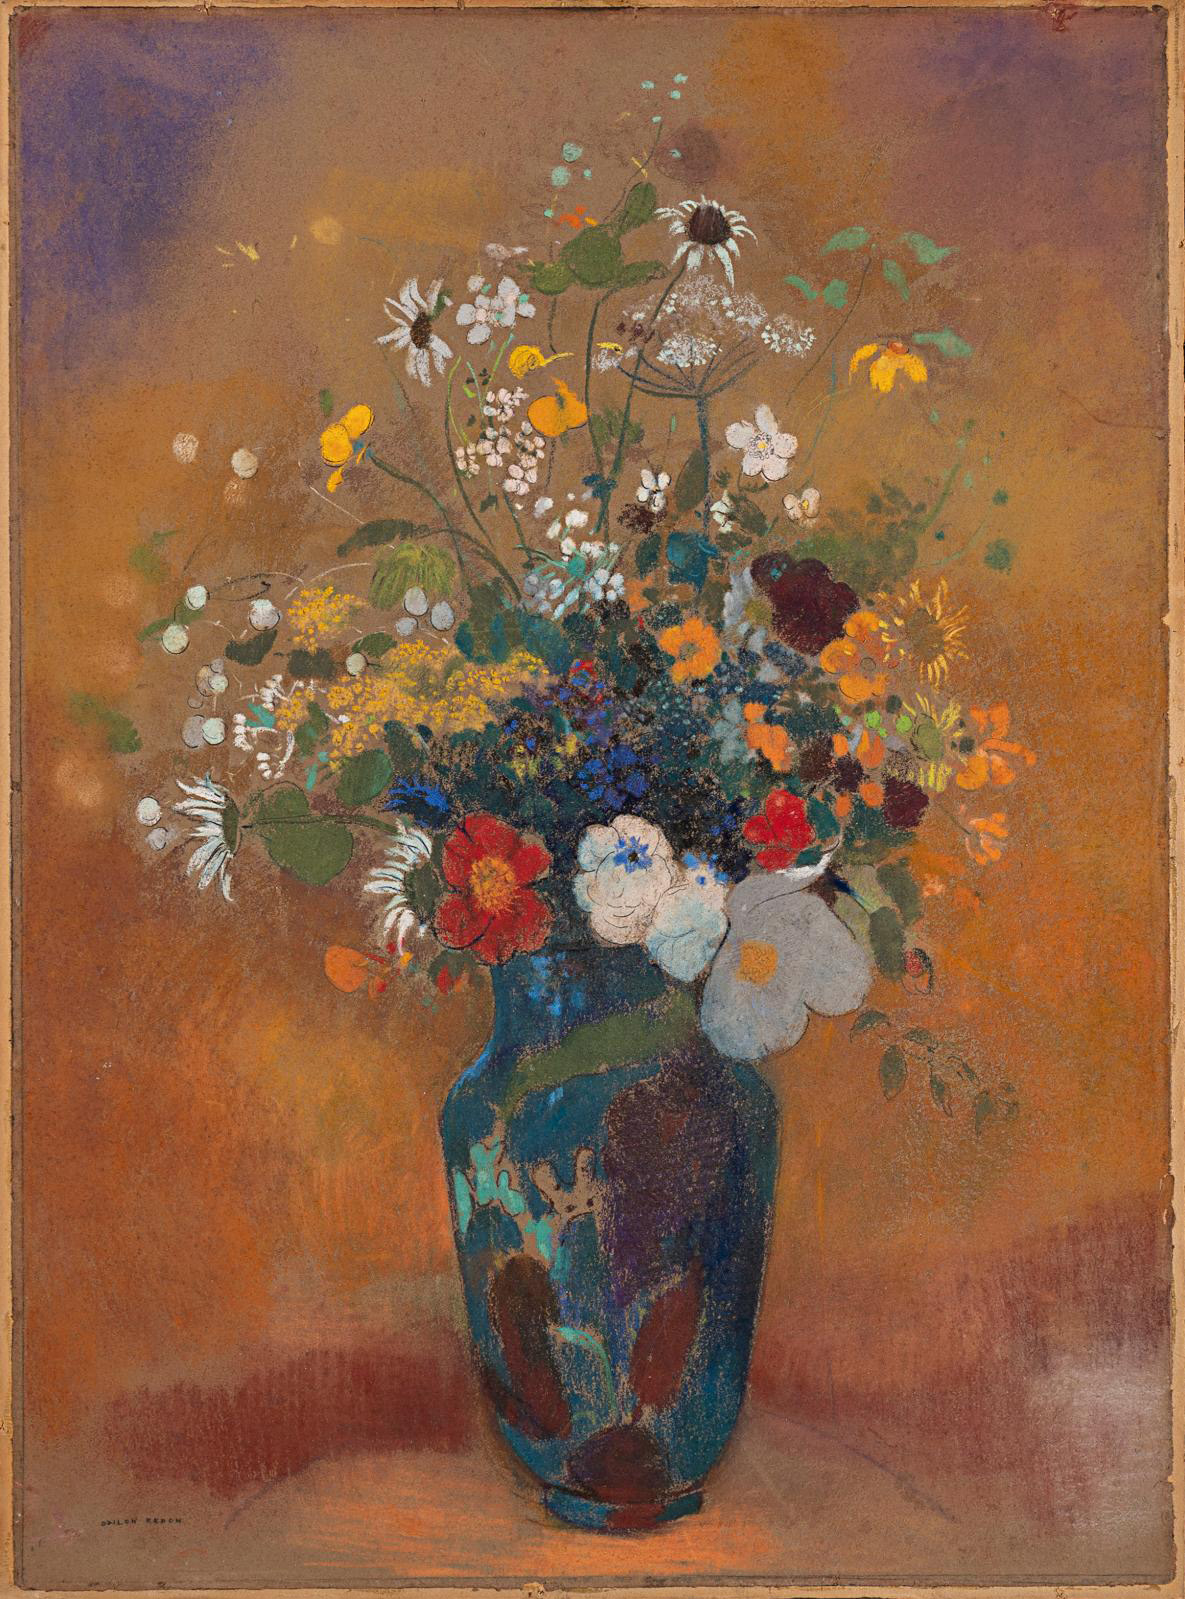  An Armful of Wildflowers in a Delicate Pastel by Odilon Redon 